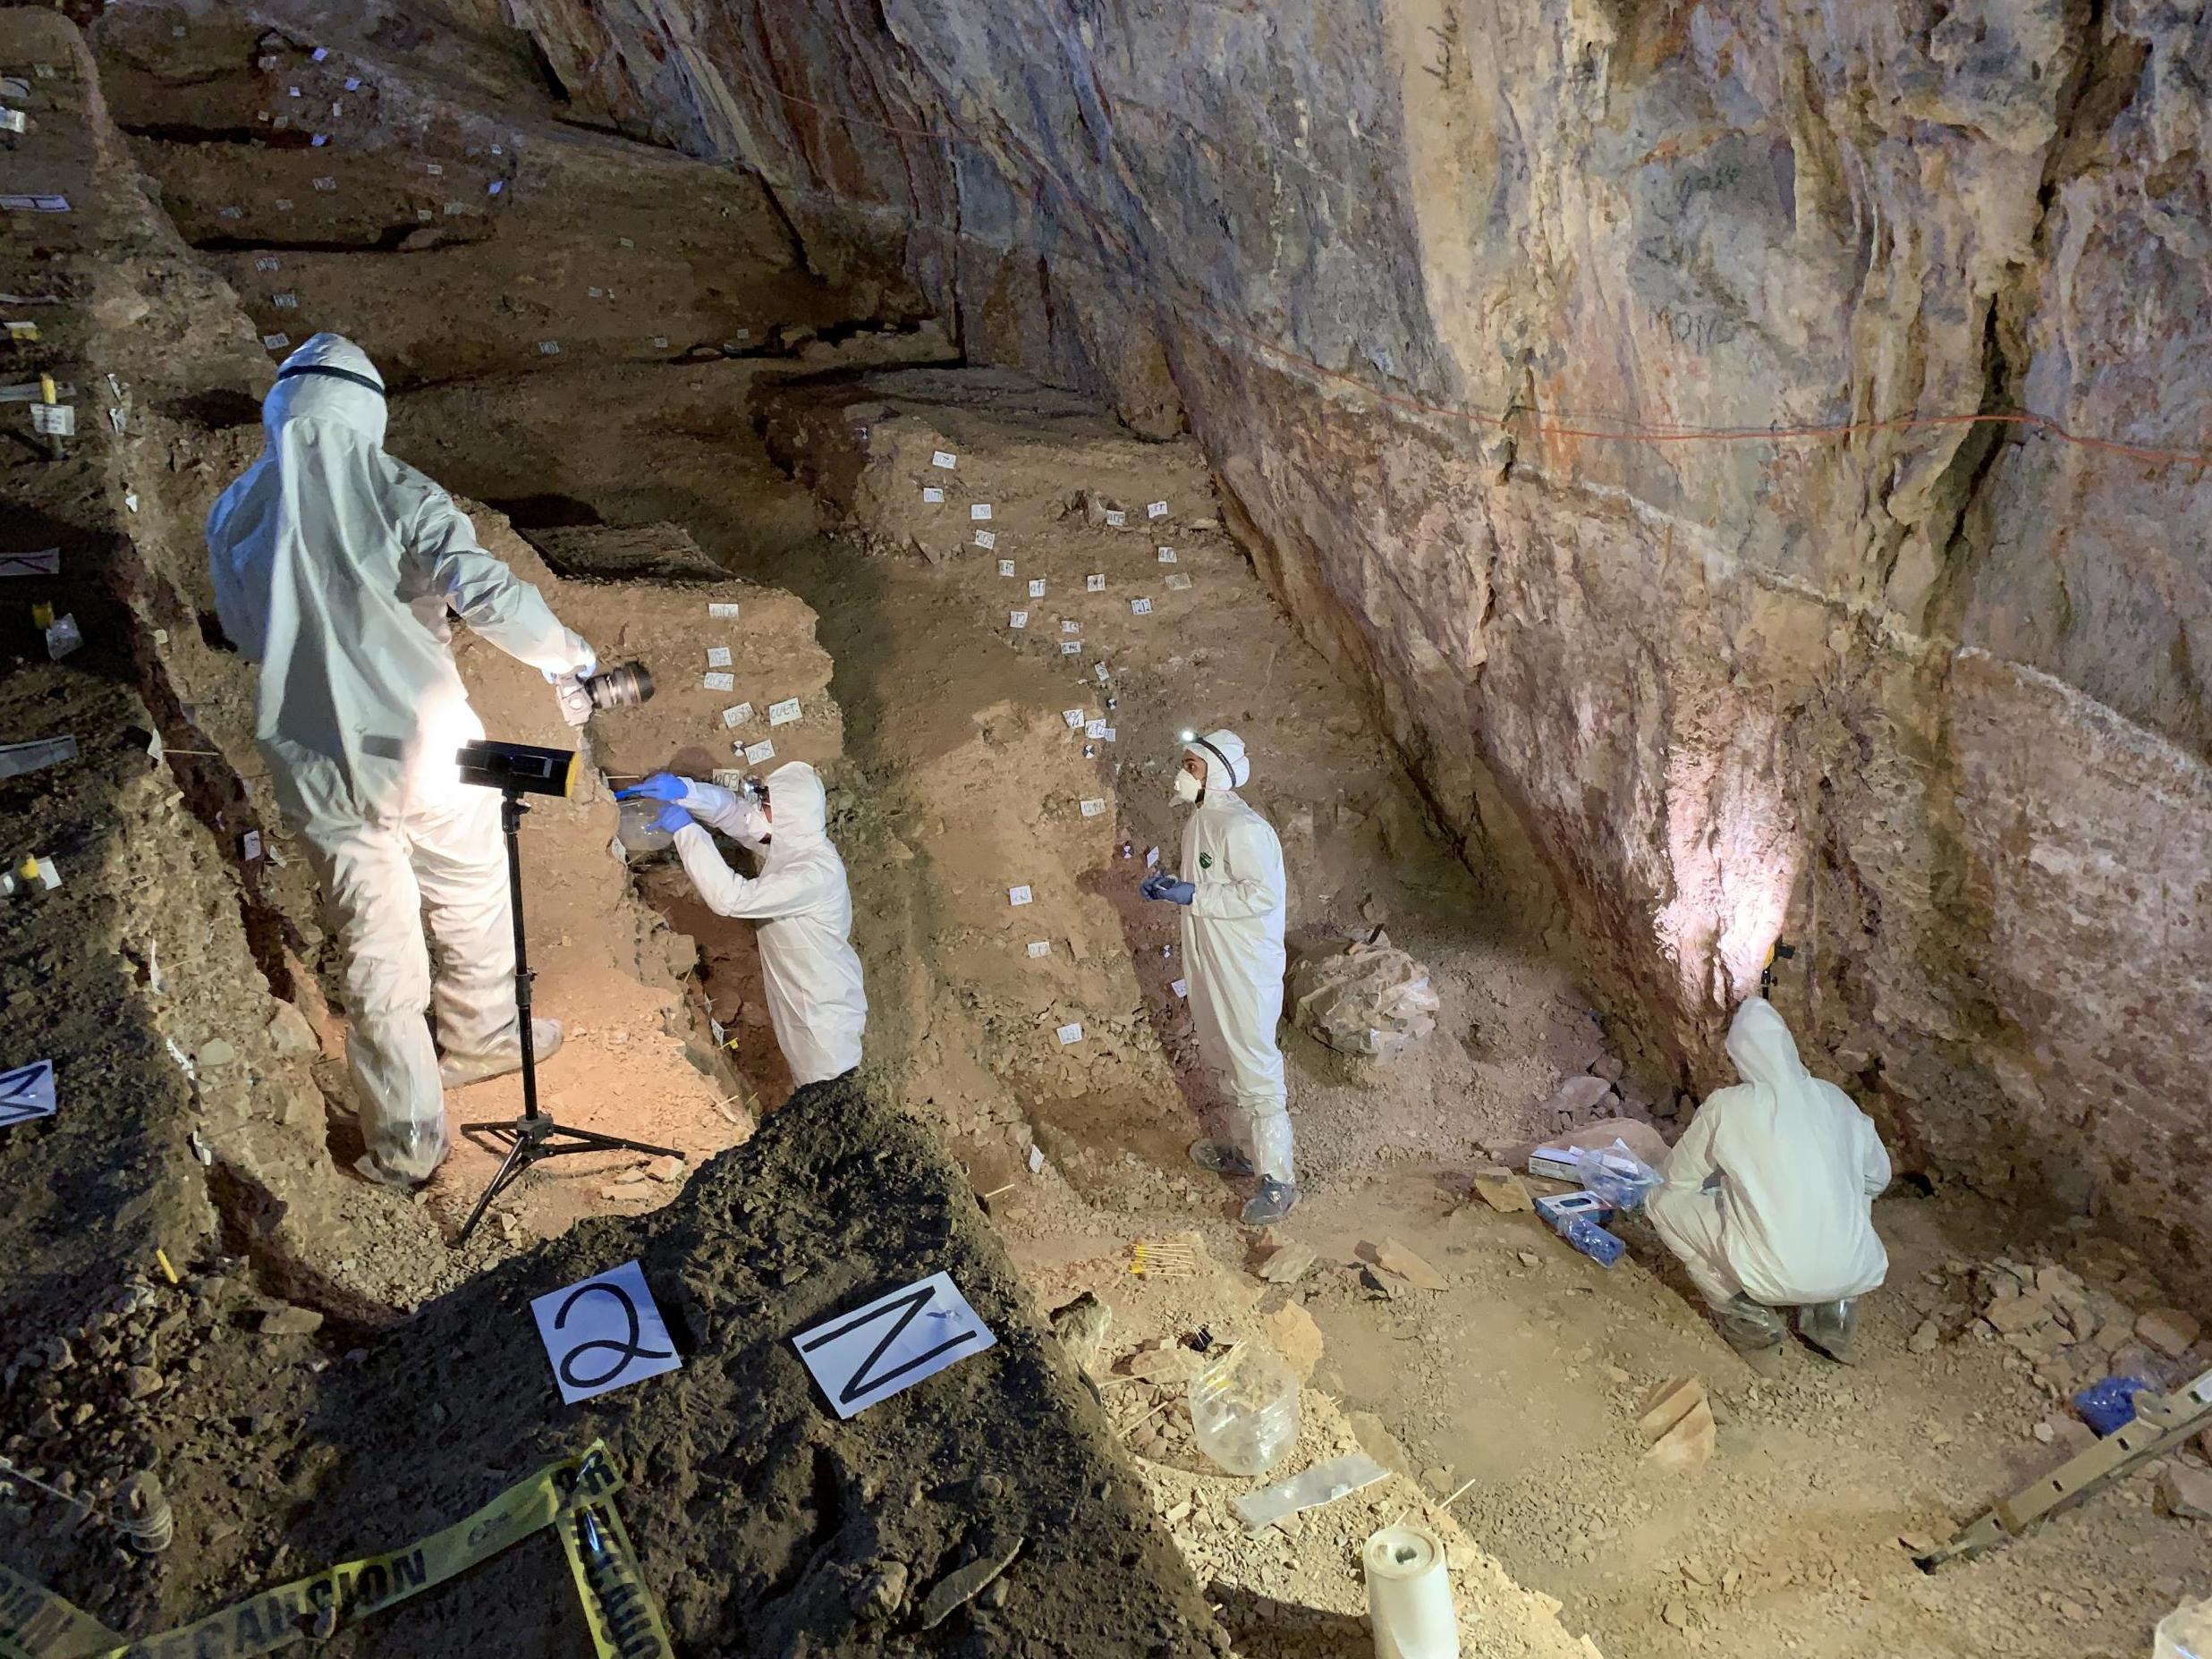 Scientists and archaeologists made the discovery in a remote cave in the state of the Zacatecas, central Mexico